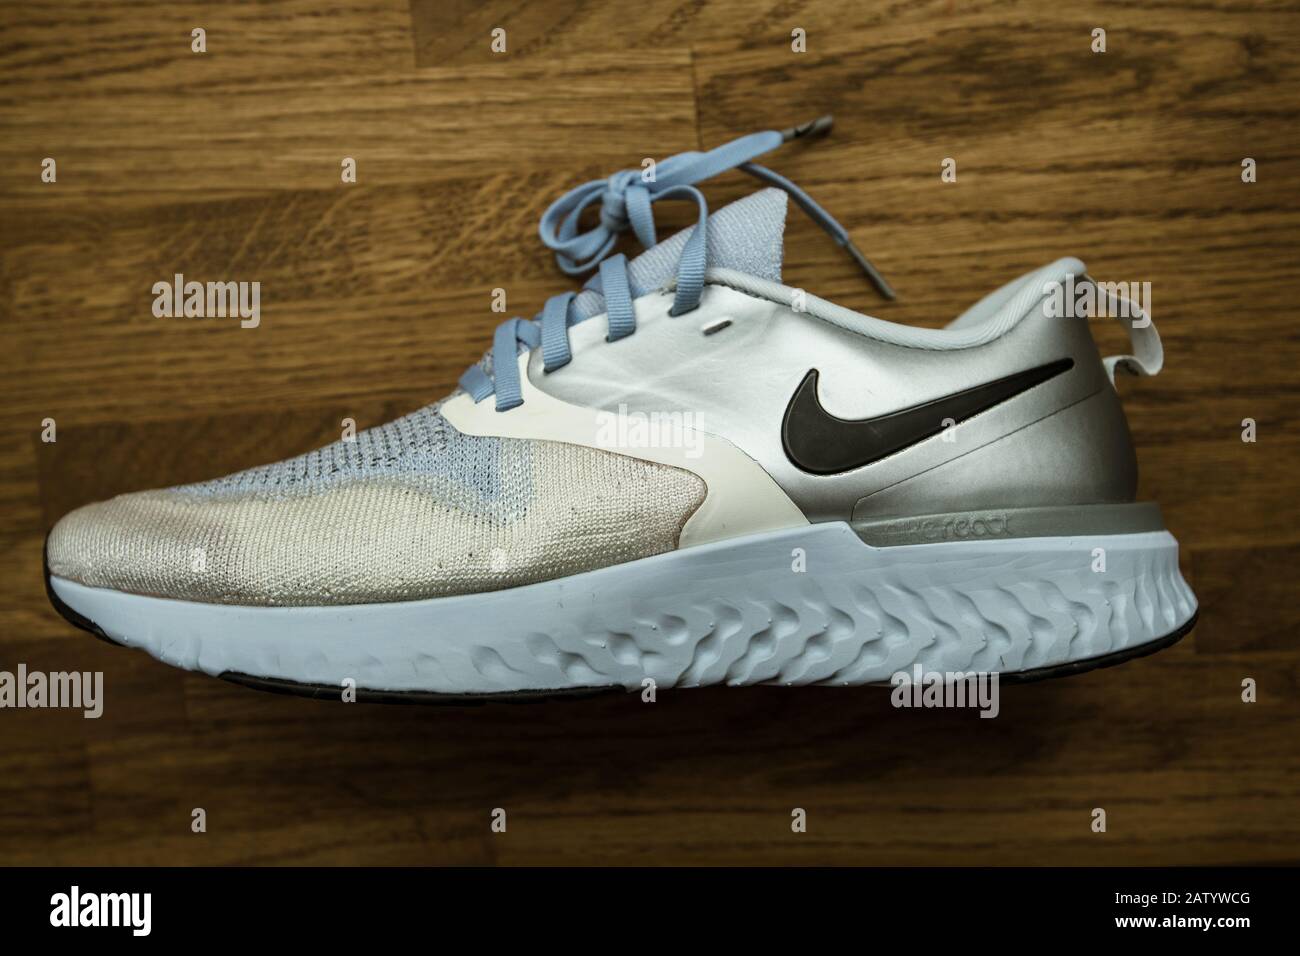 Paris, France - Sep 23, 2019: Overhead view professional running shoe  manufactured by Nike model Odyssey React Flyknit 2 Premium silver and gray  color Stock Photo - Alamy